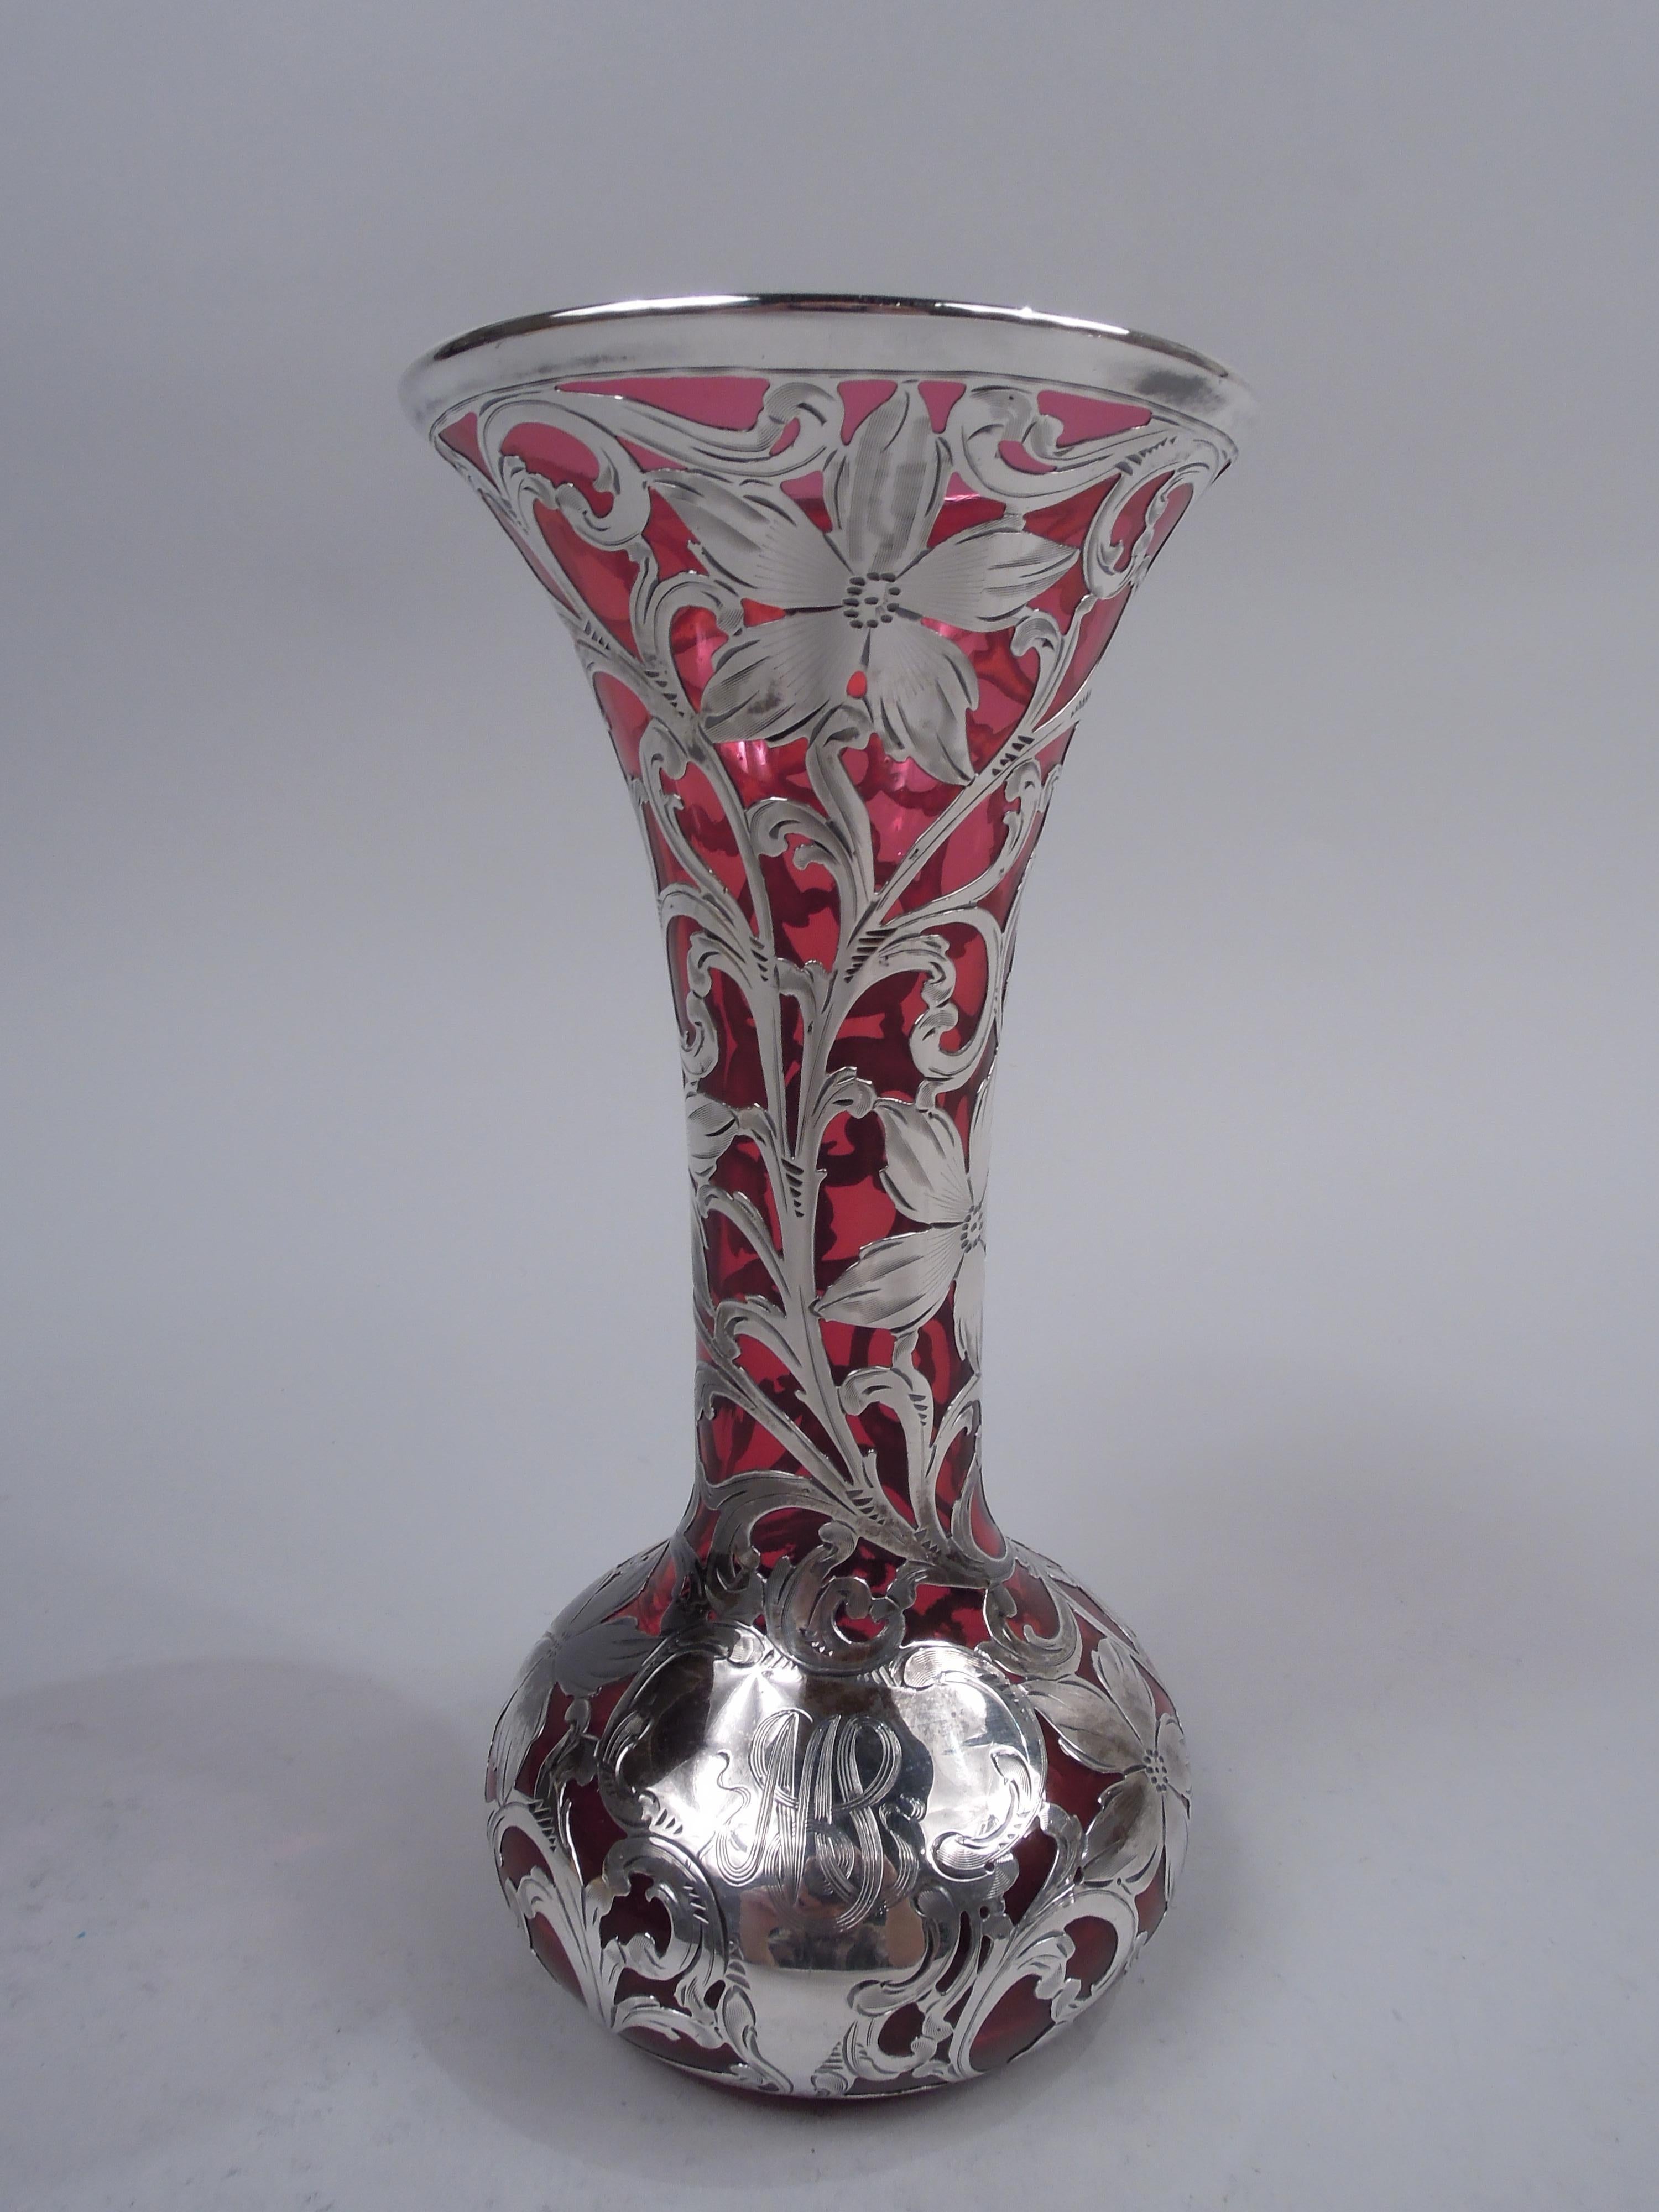 Art Nouveau glass vase with engraved silver overlay. Made by Alvin Corp. in Providence, ca 1900. Conical mouth and neck, and bellied bowl. Overlay in form of dense leafing scrollwork and flowers; asymmetrical scrolled cartouche engraved with